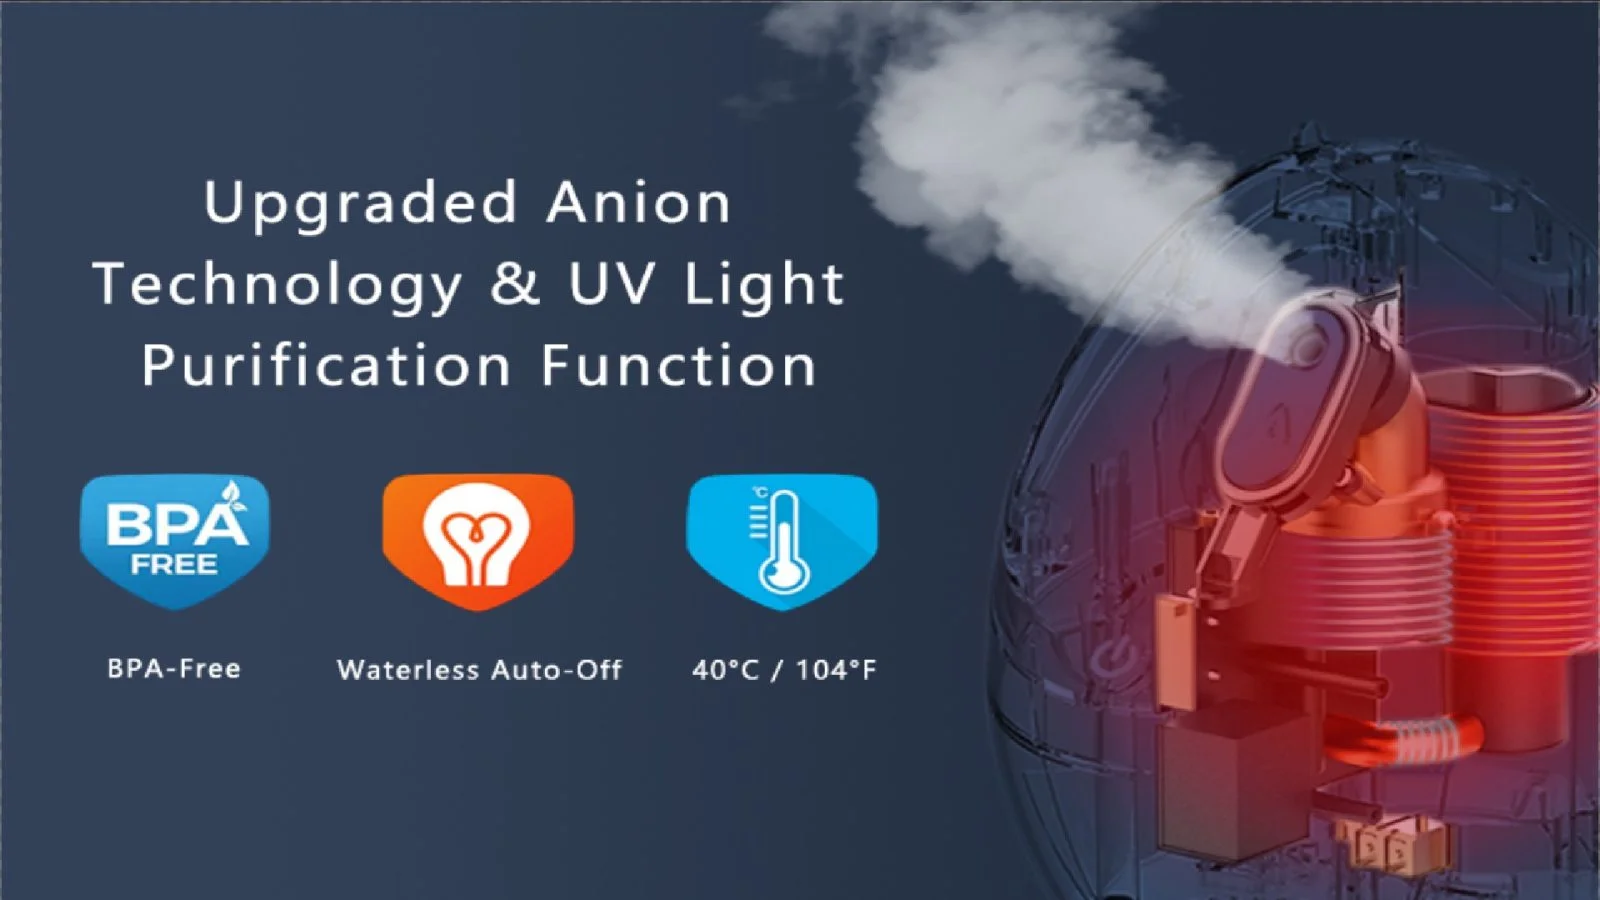 facial steamer with upgraded anion technology and uv light purification function